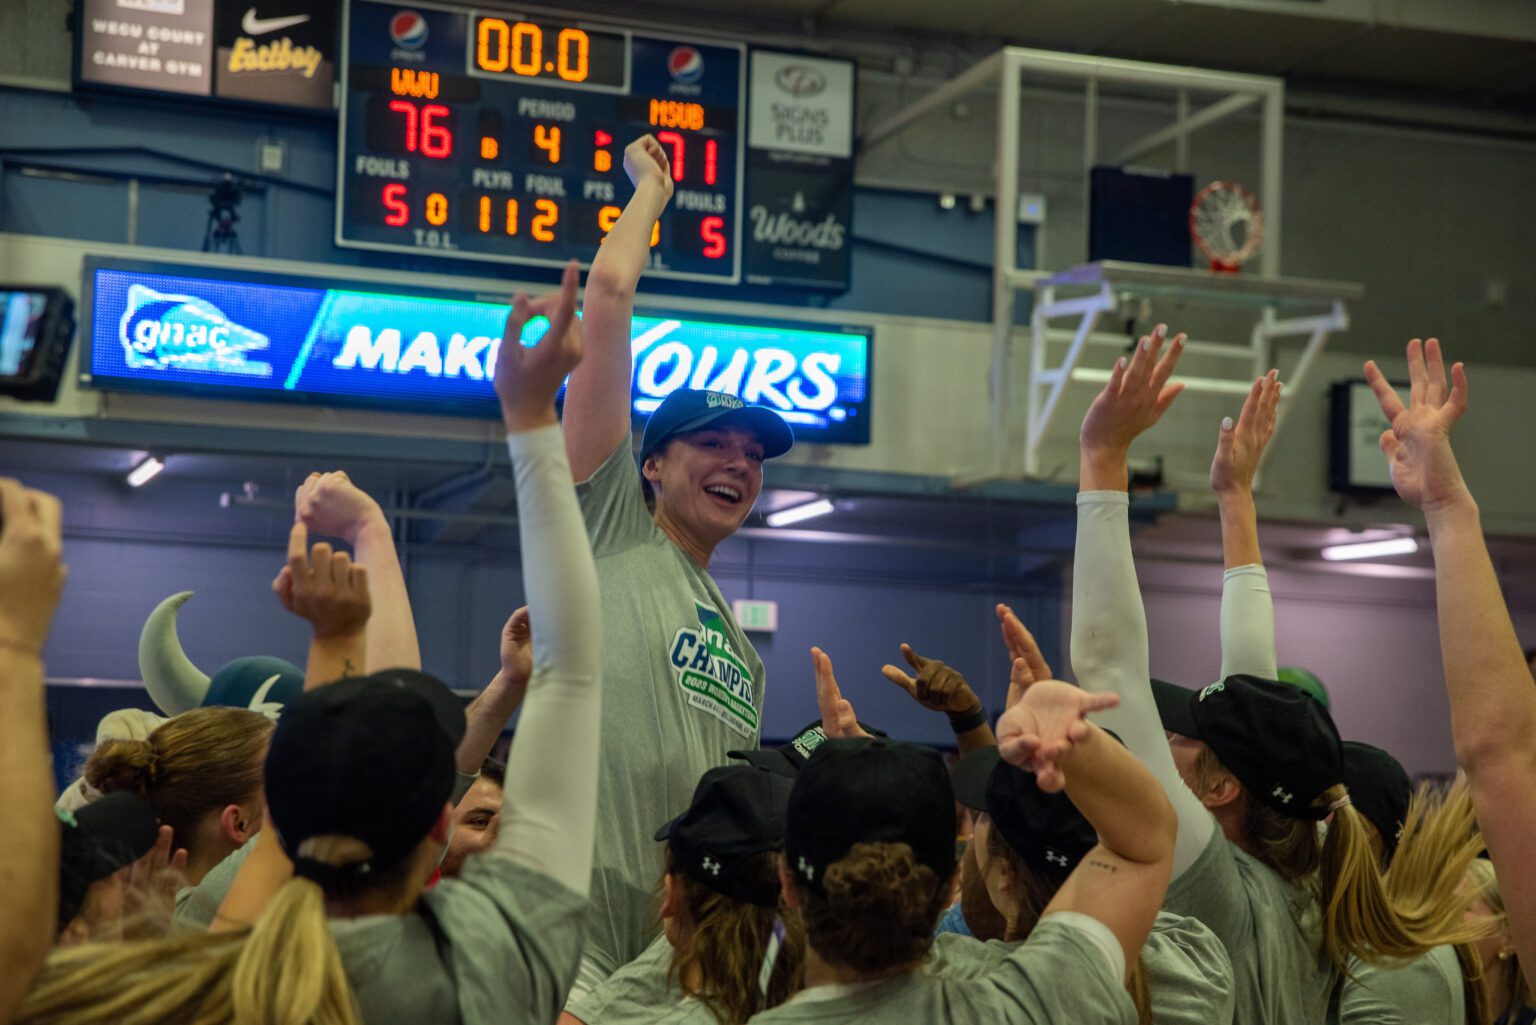 Western Washington University's Brooke Walling is hoisted into the air March 4 after the Vikings defeated Montana State University Billings 76-71 to clinch the Great Northwest Athletic Conference championship at Carver Gymnasium.